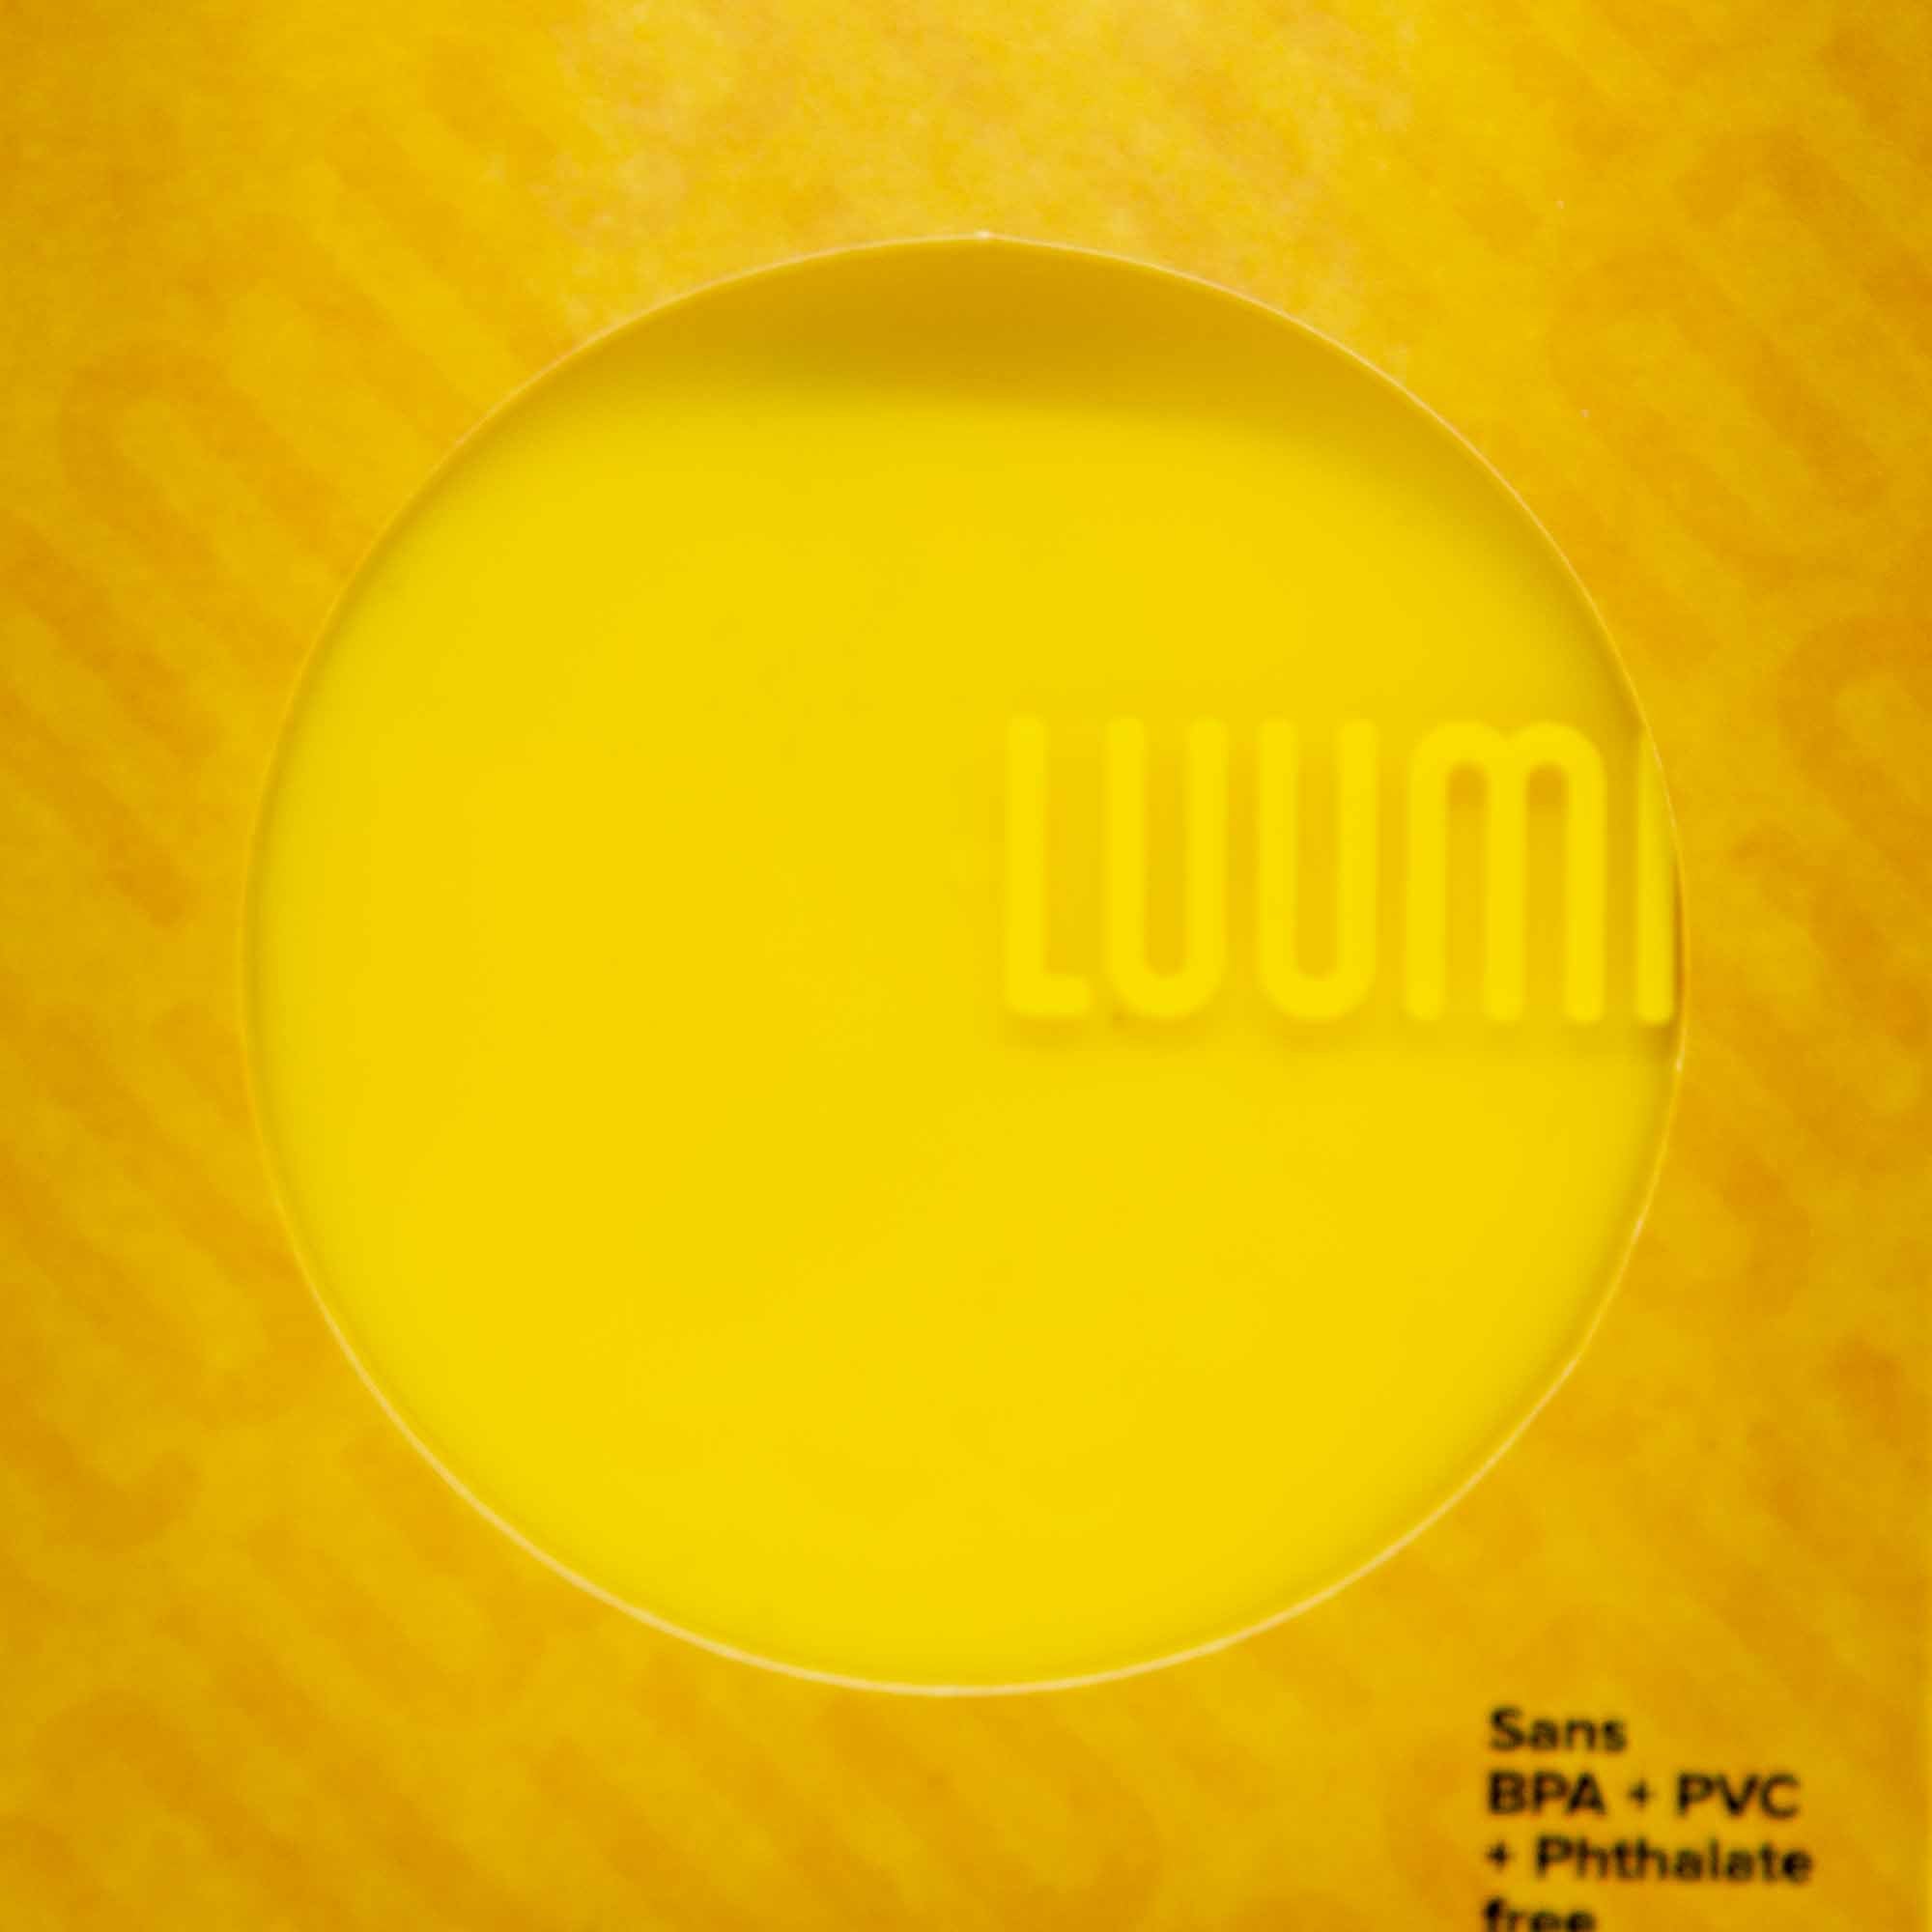 Luumi Unplastic Sipping Lid - Mortise And Tenon